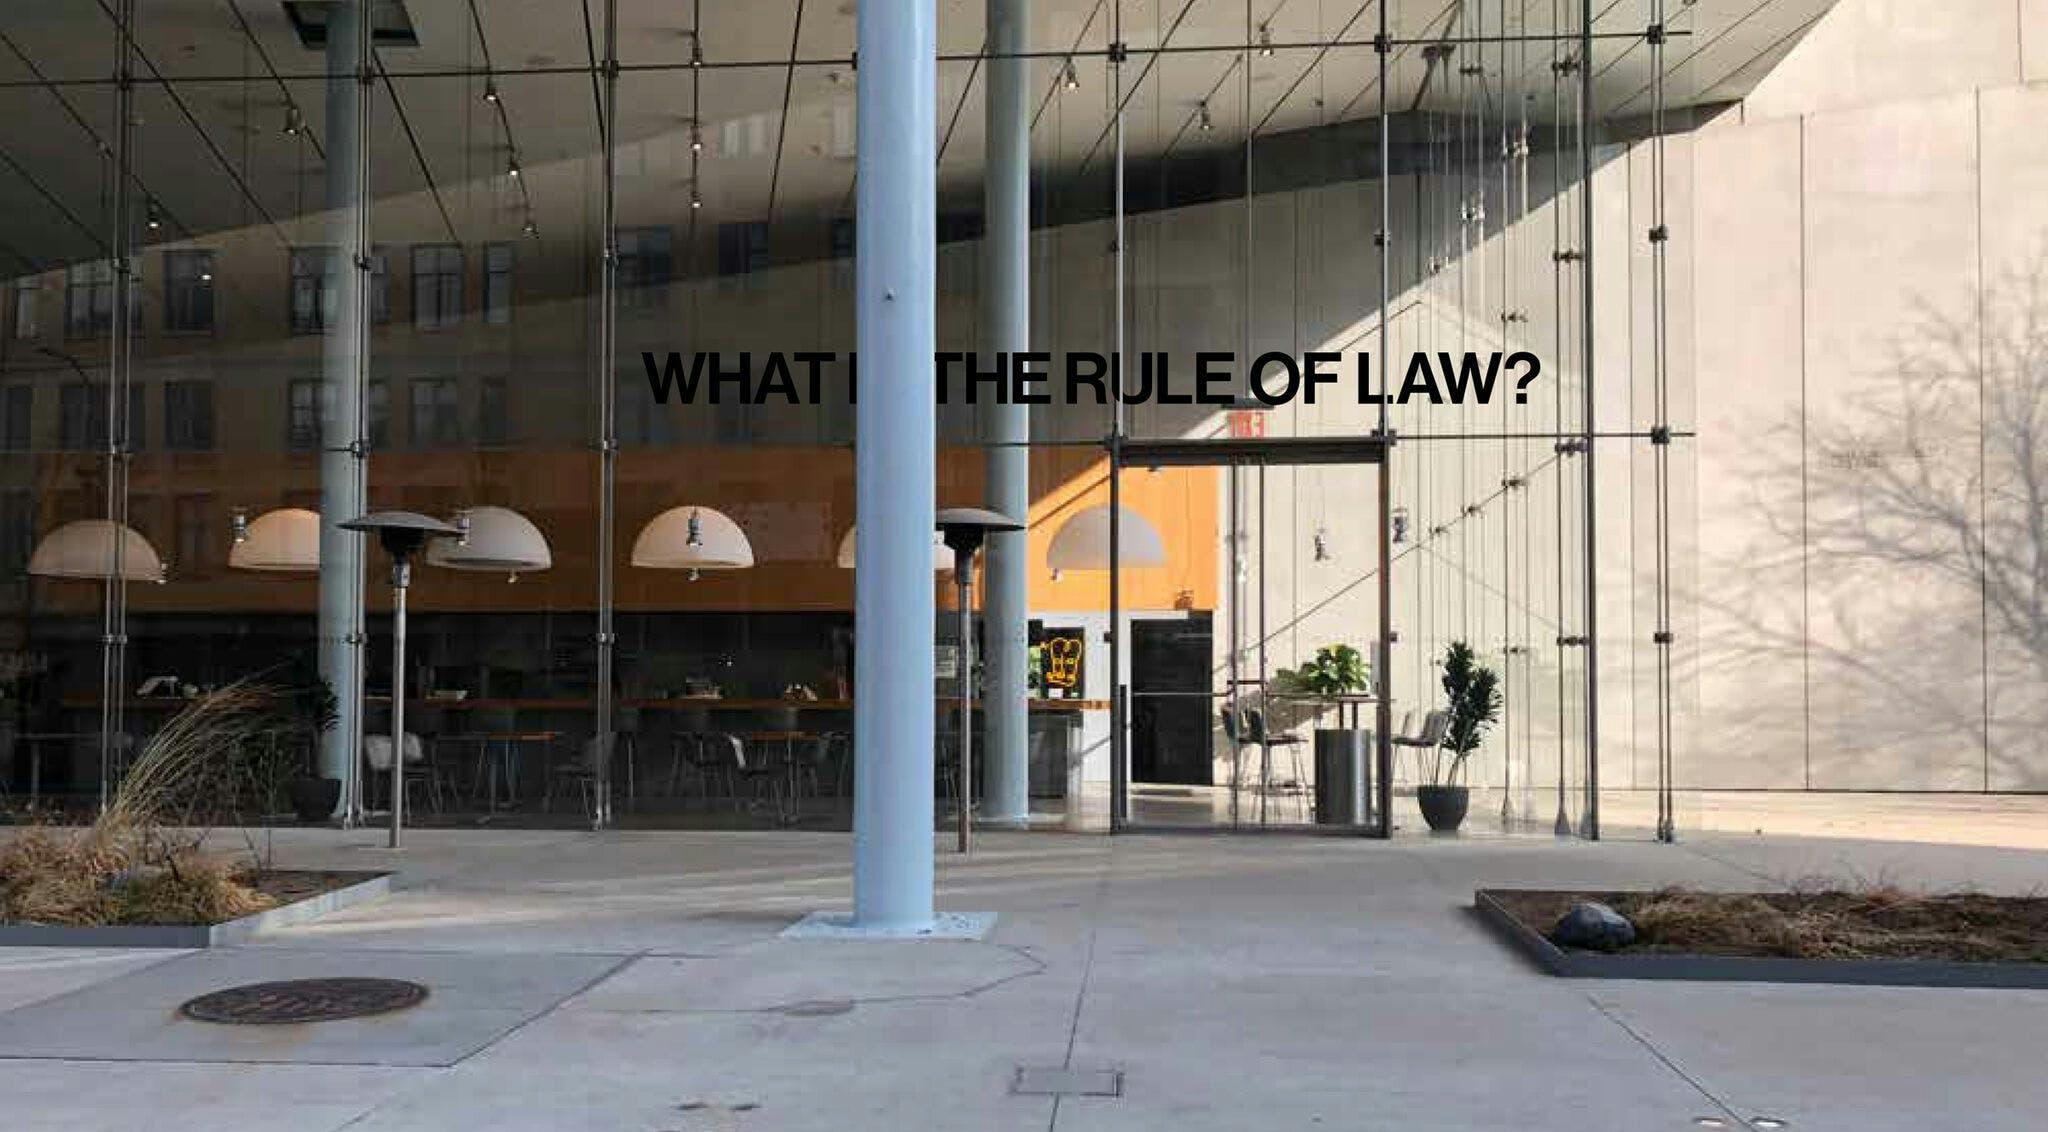 The outside of the Whitney Museum reading "What is the rule of the law?"